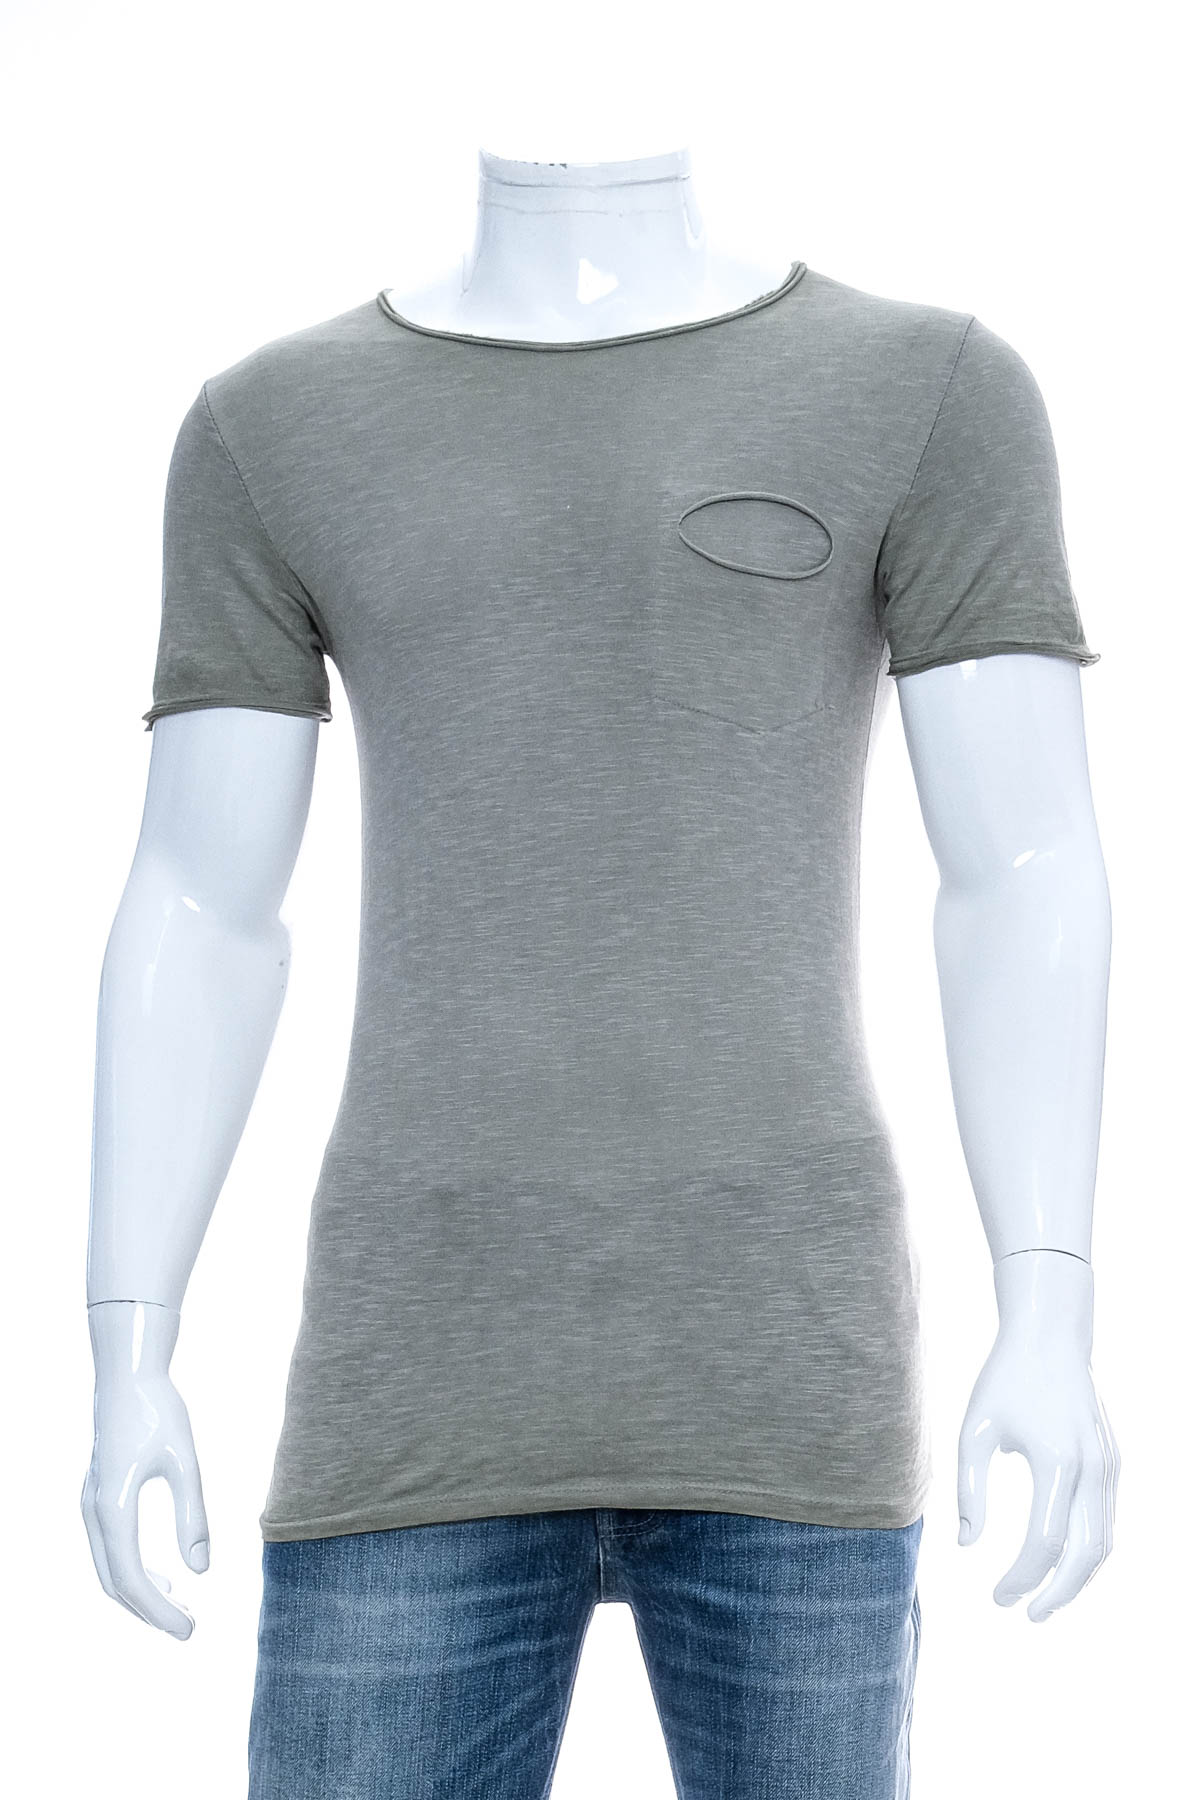 Men's T-shirt - Made in Italy - 0